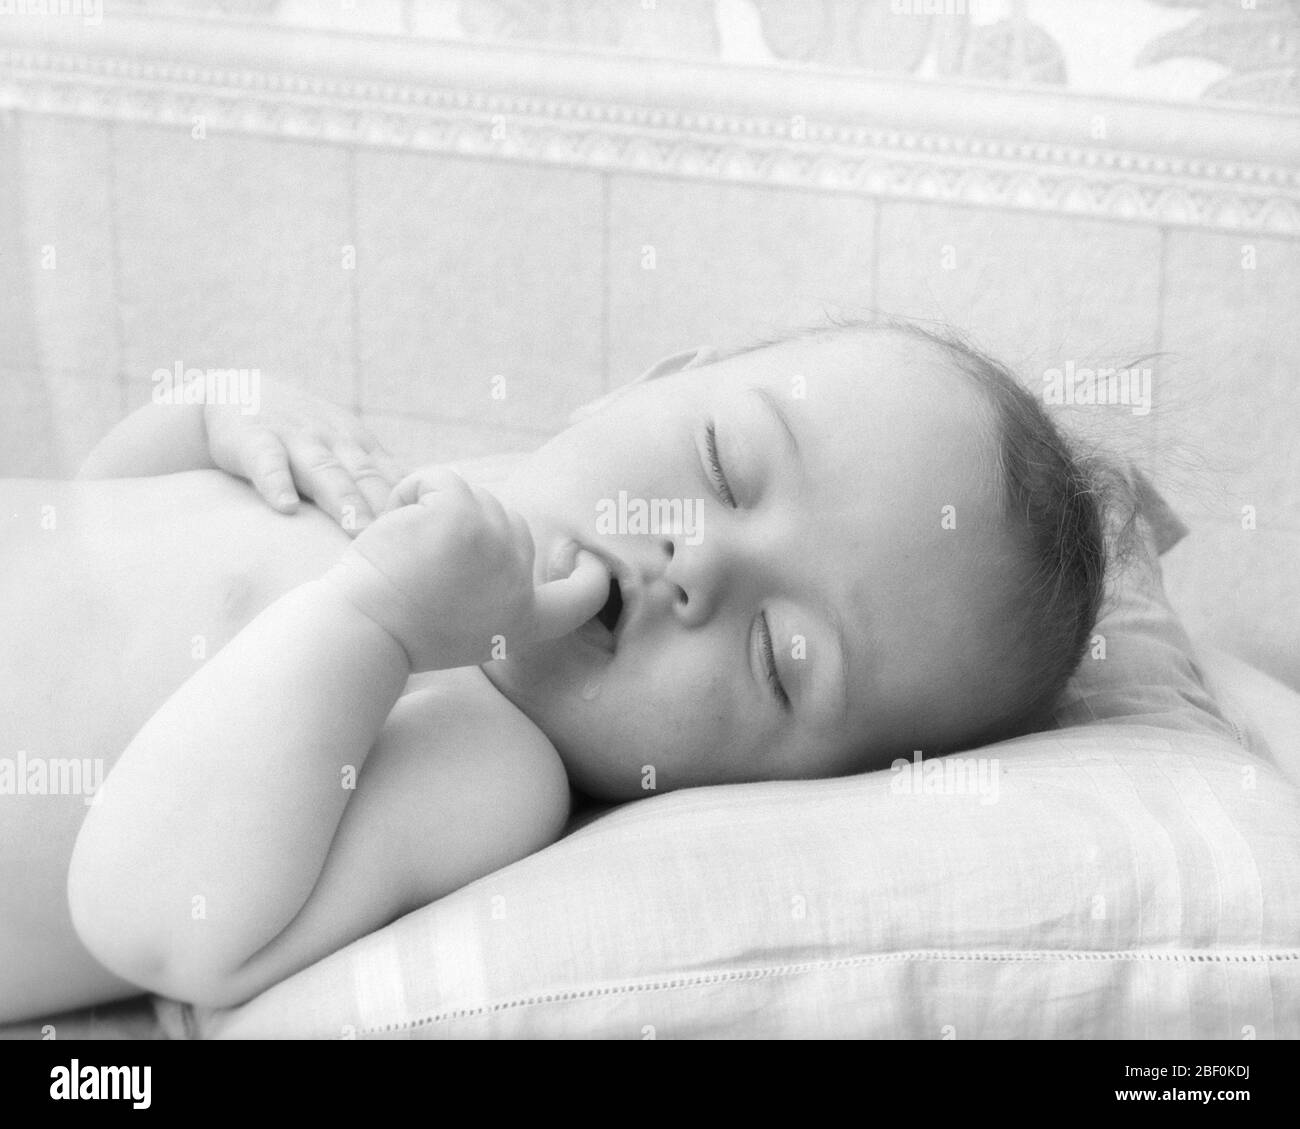 1920s 1930s PEACEFULLY SLEEPING BABY WITH INDEX FINGER IN MOUTH - b220 HAR001 HARS RELAXATION REST BABY GIRL BLACK AND WHITE CAUCASIAN ETHNICITY HAR001 OLD FASHIONED Stock Photo